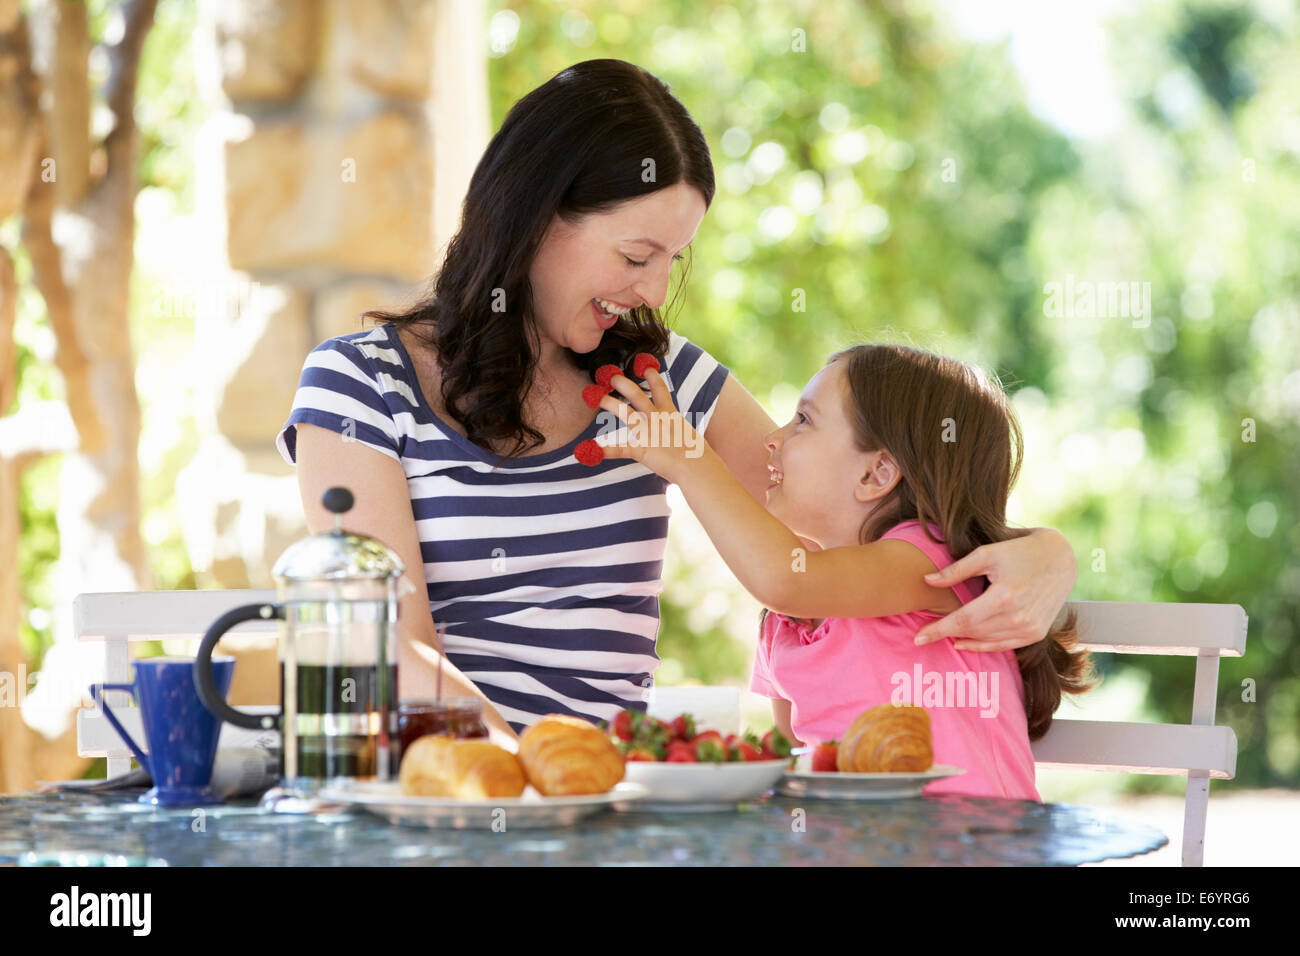 Mother and daughter eating breakfast outdoors Stock Photo